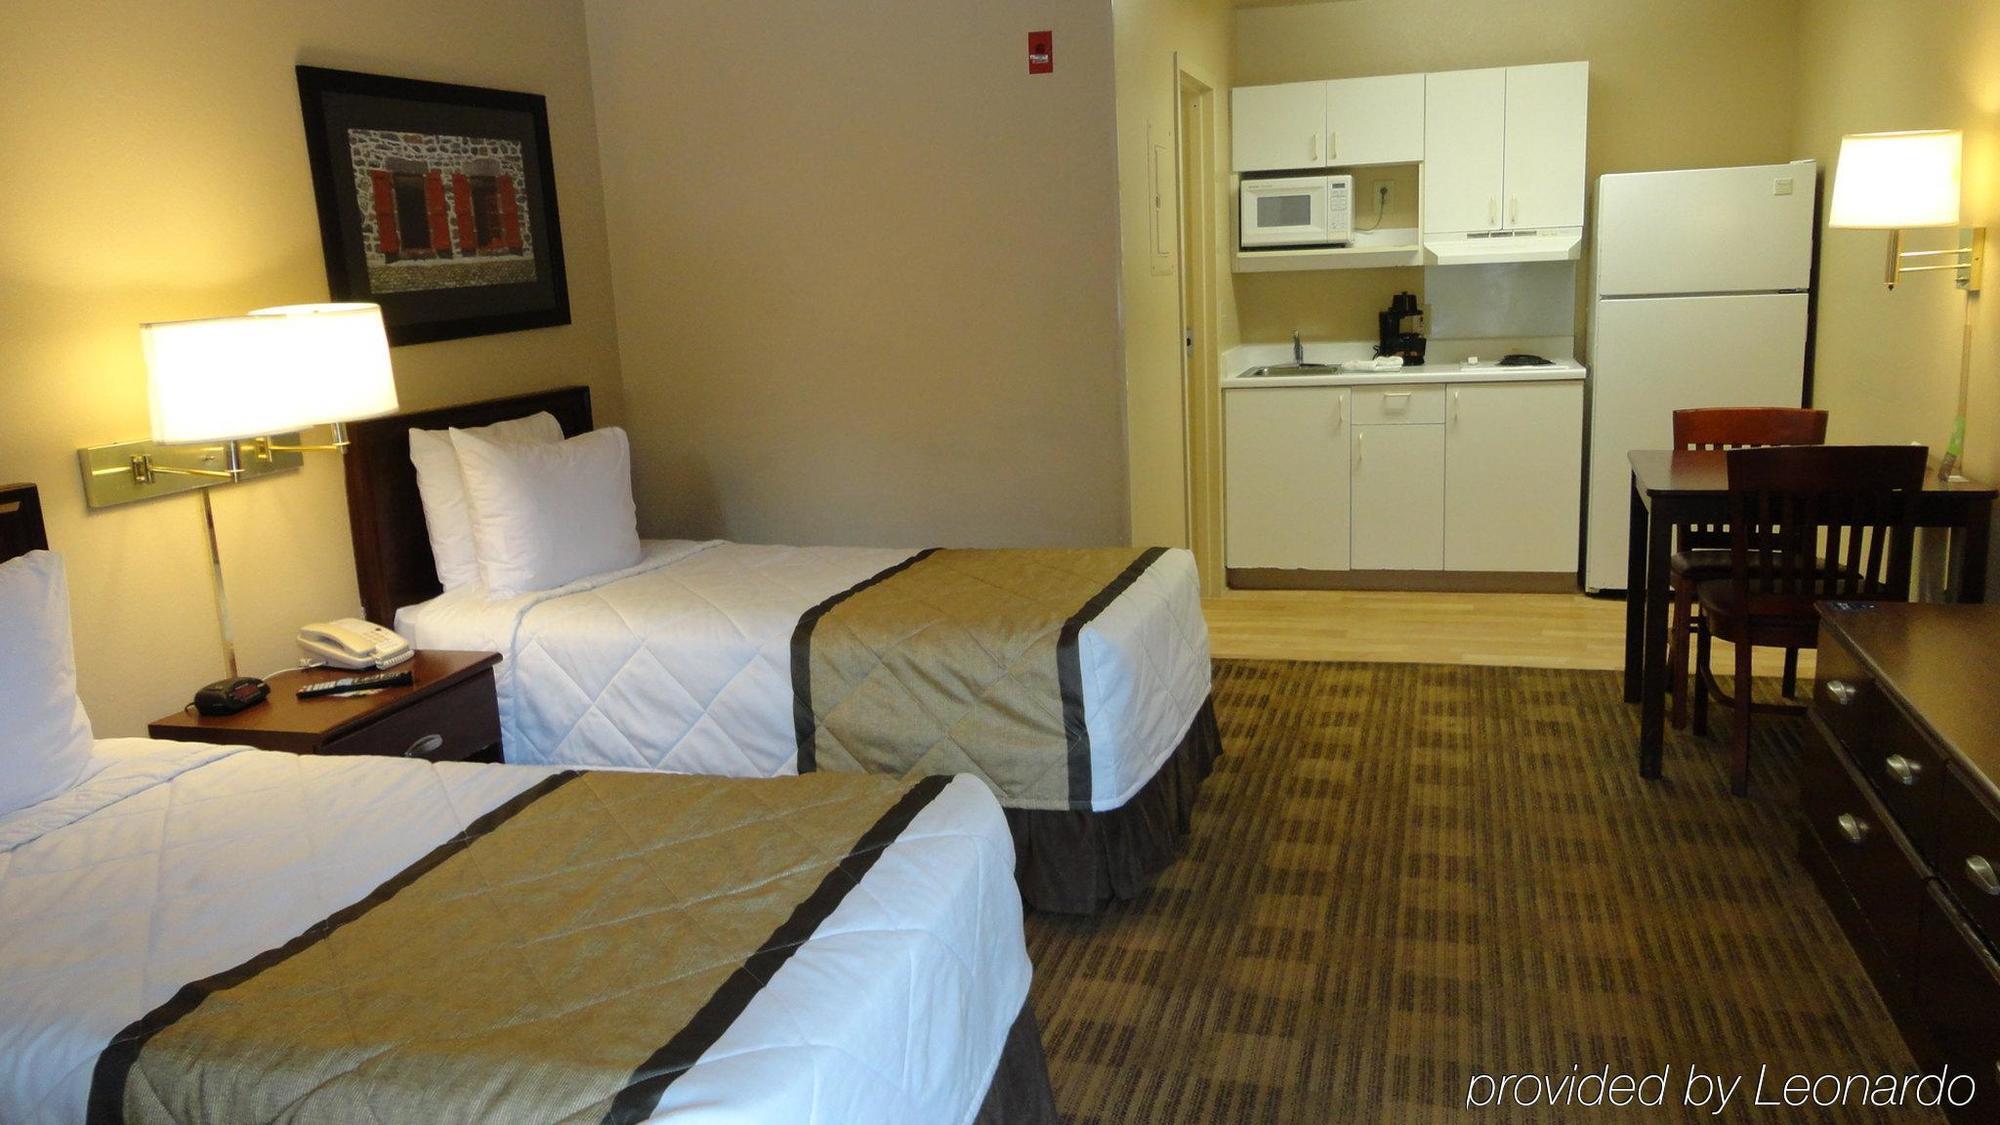 Mainstay Suites Little Rock West Near Medical Centers Экстерьер фото